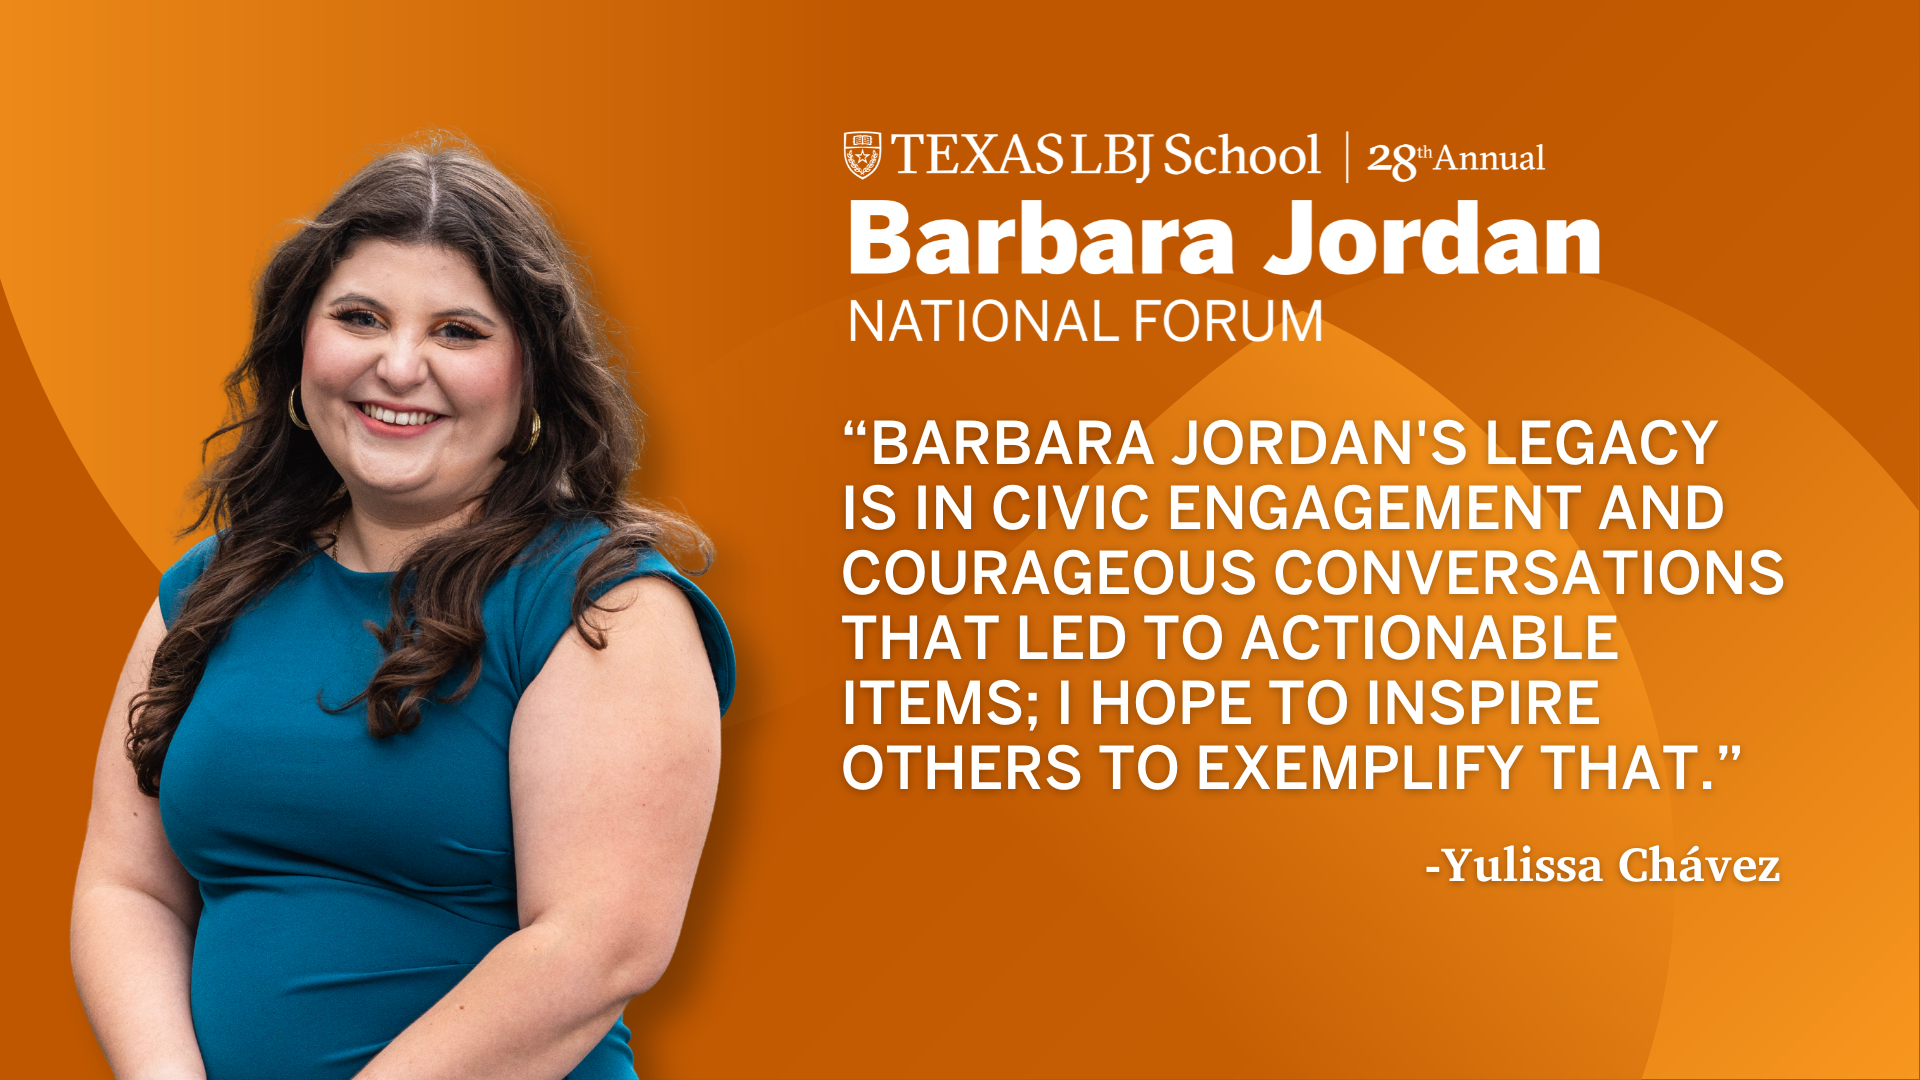 Yulissa Chávez, Barbara Jordan National Forum student chair quote: Barbara Jordan's legacy is in civic engagement and courageous conversations that led to actionable items: I hope to inspire others to exemplify that.